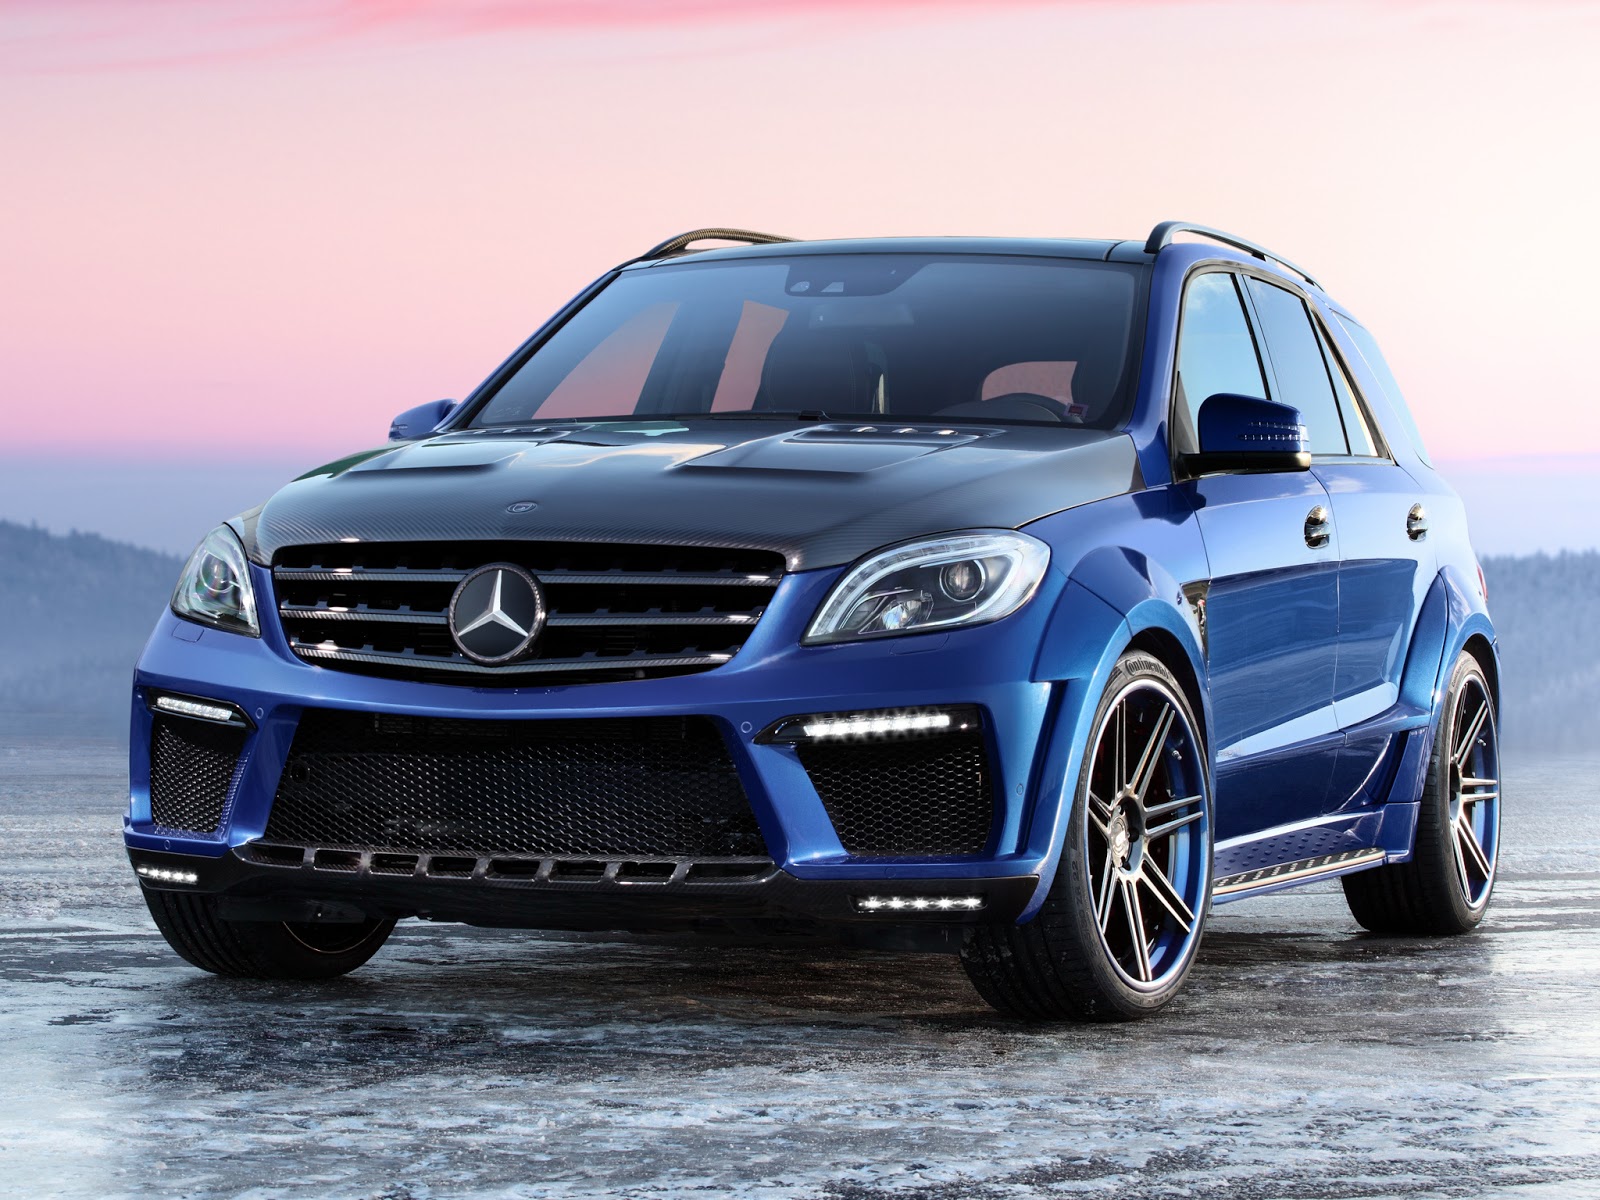 Mercedes Benz Suv Wallpaper In Blue Cars Models Collection